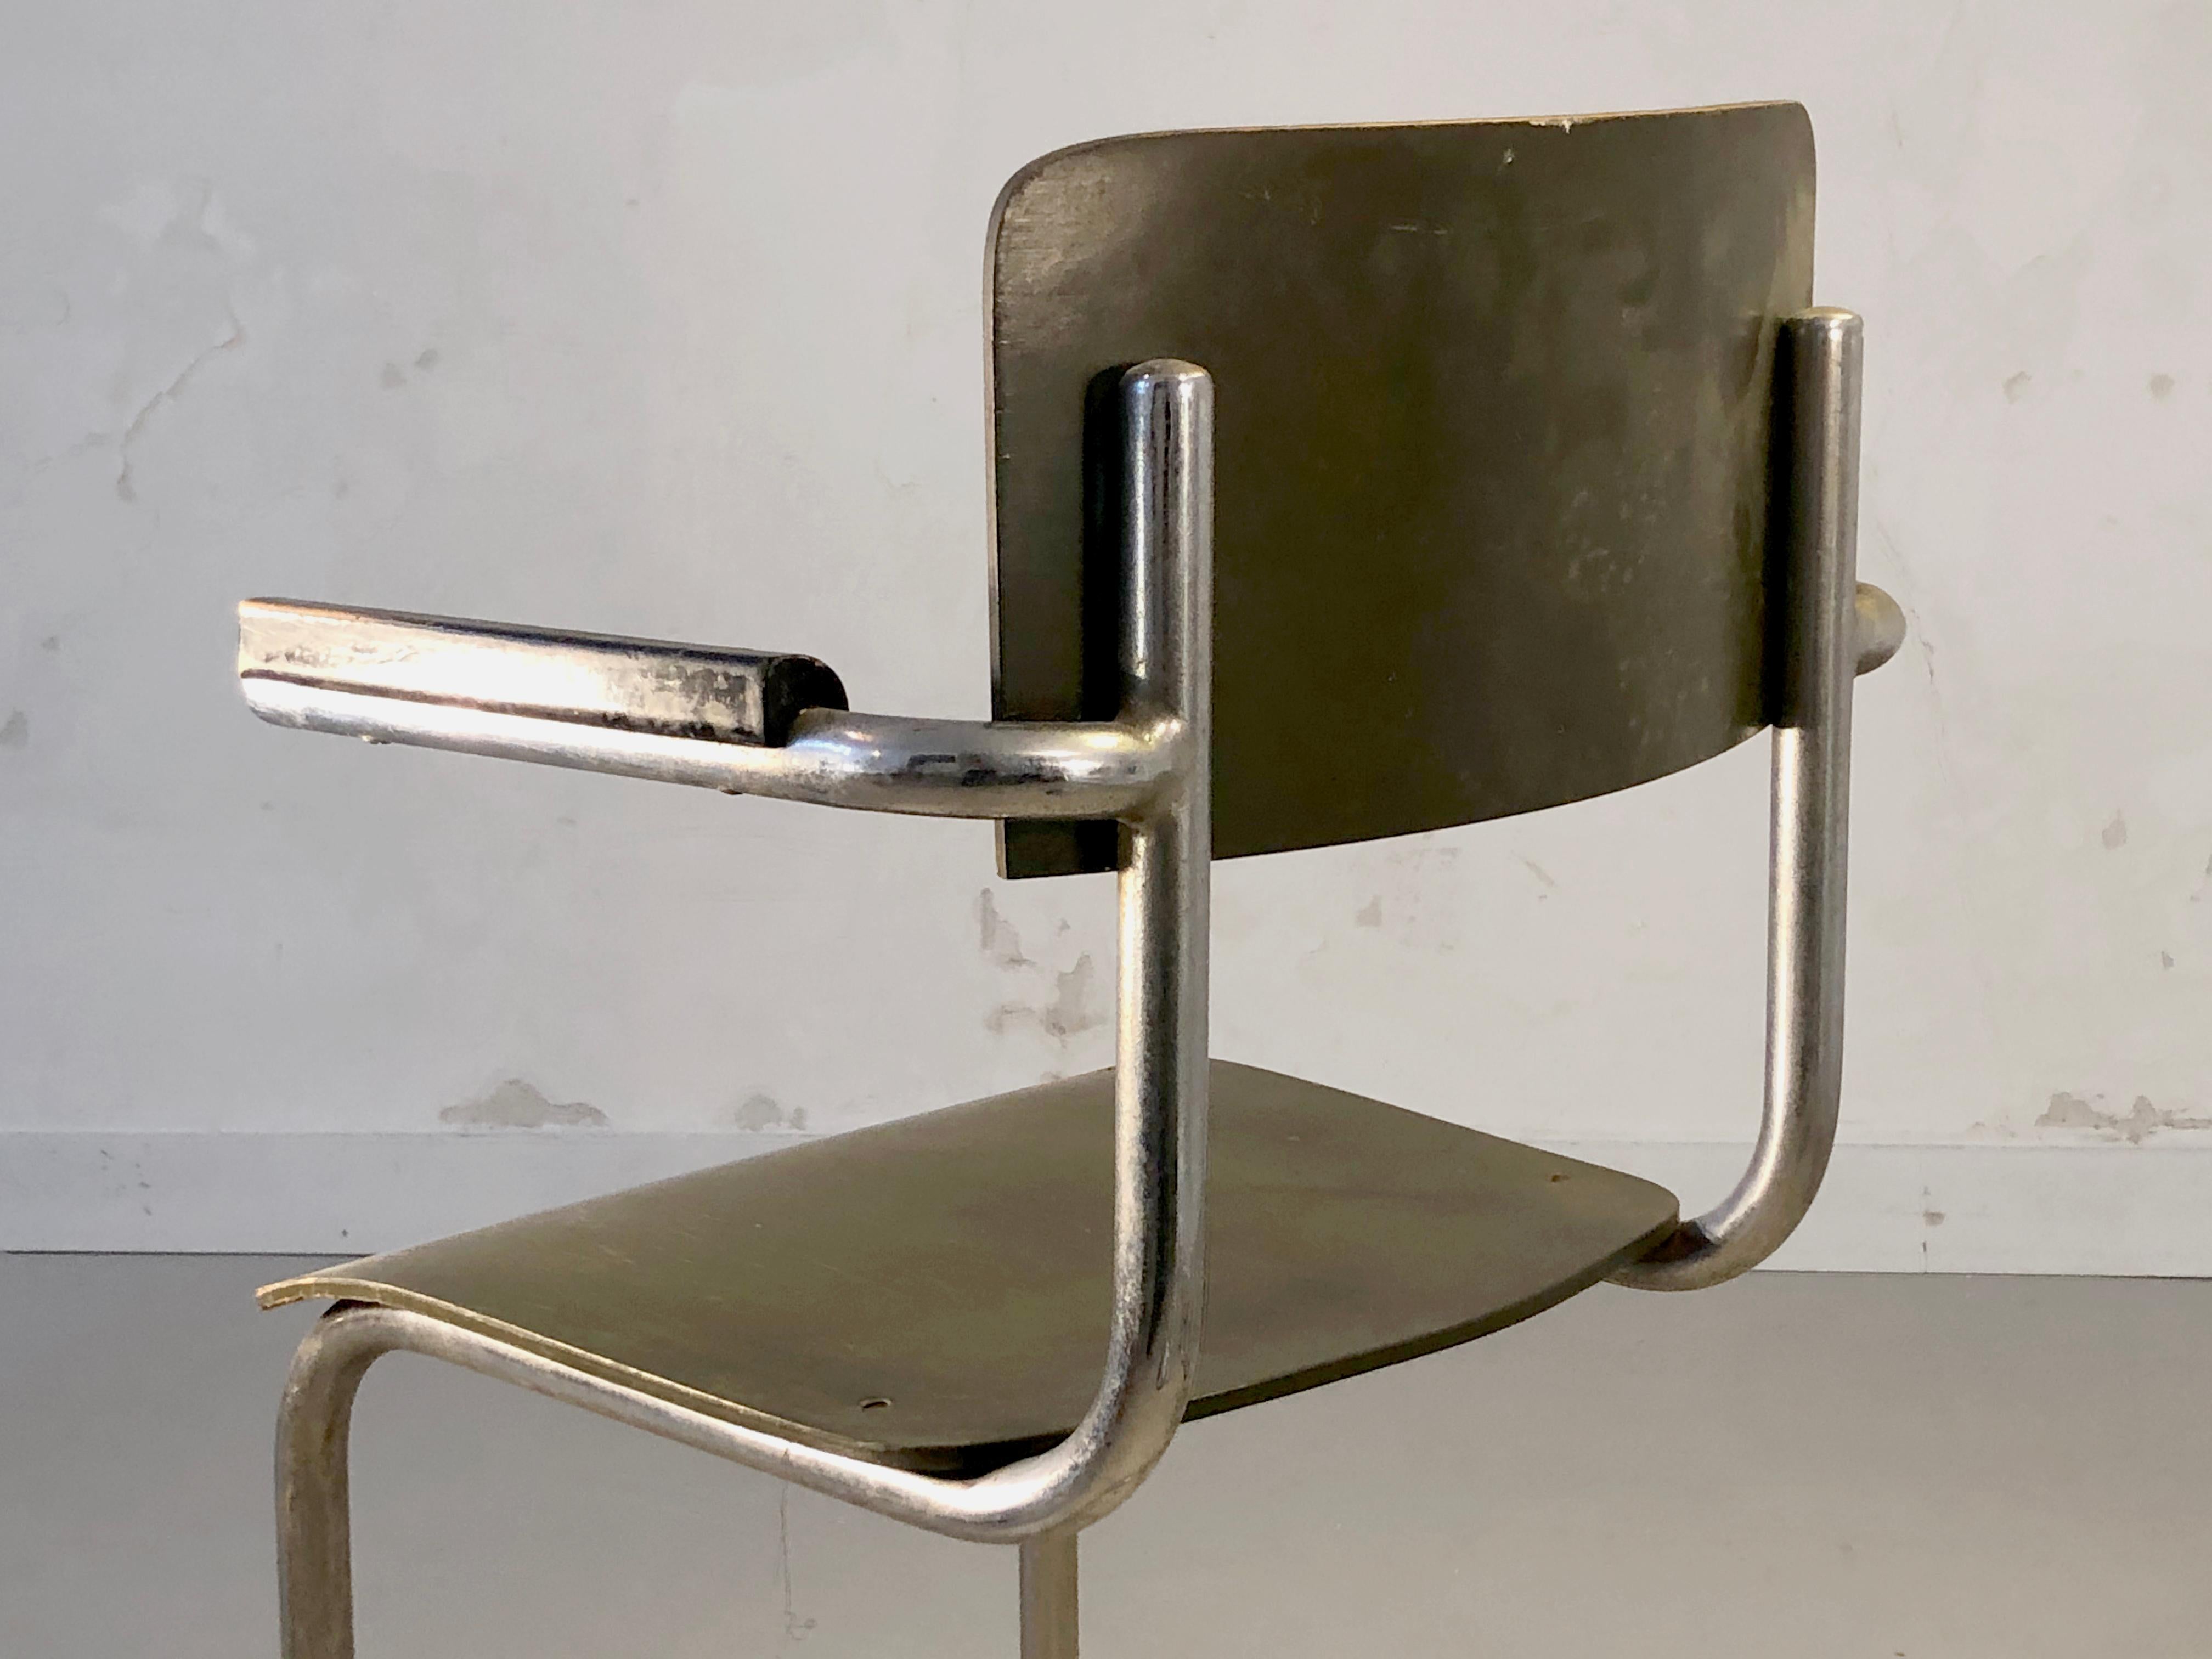 An Early MODERNIST BAUHAUS CHAIR by MART STAM for MAUSER WERKE, Germany 1930 For Sale 2